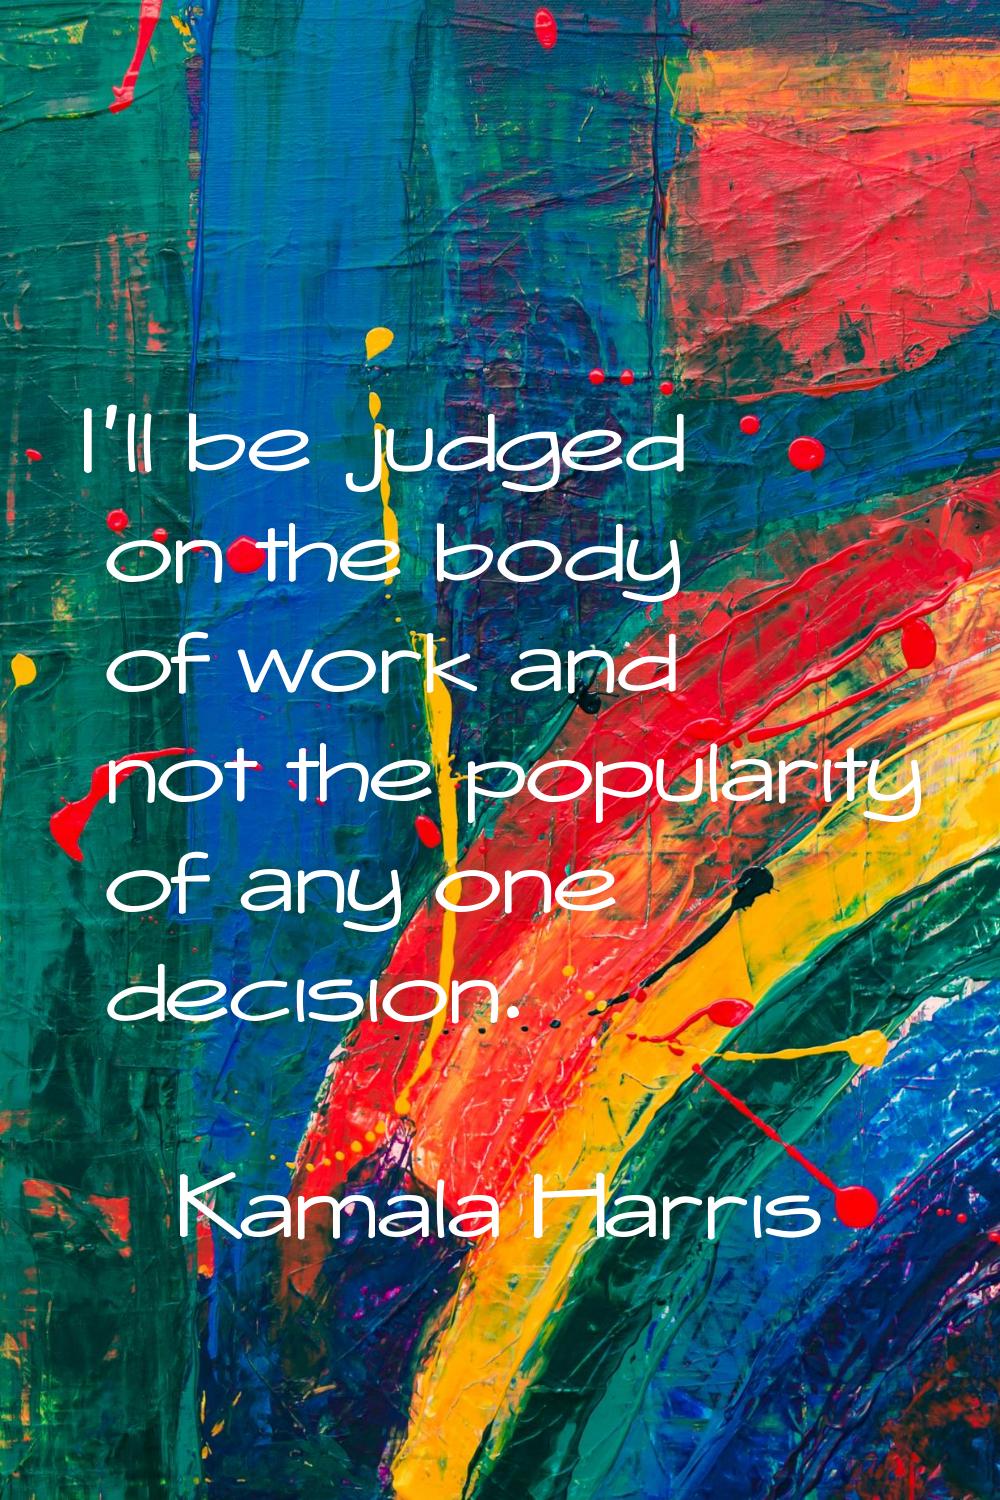 I'll be judged on the body of work and not the popularity of any one decision.